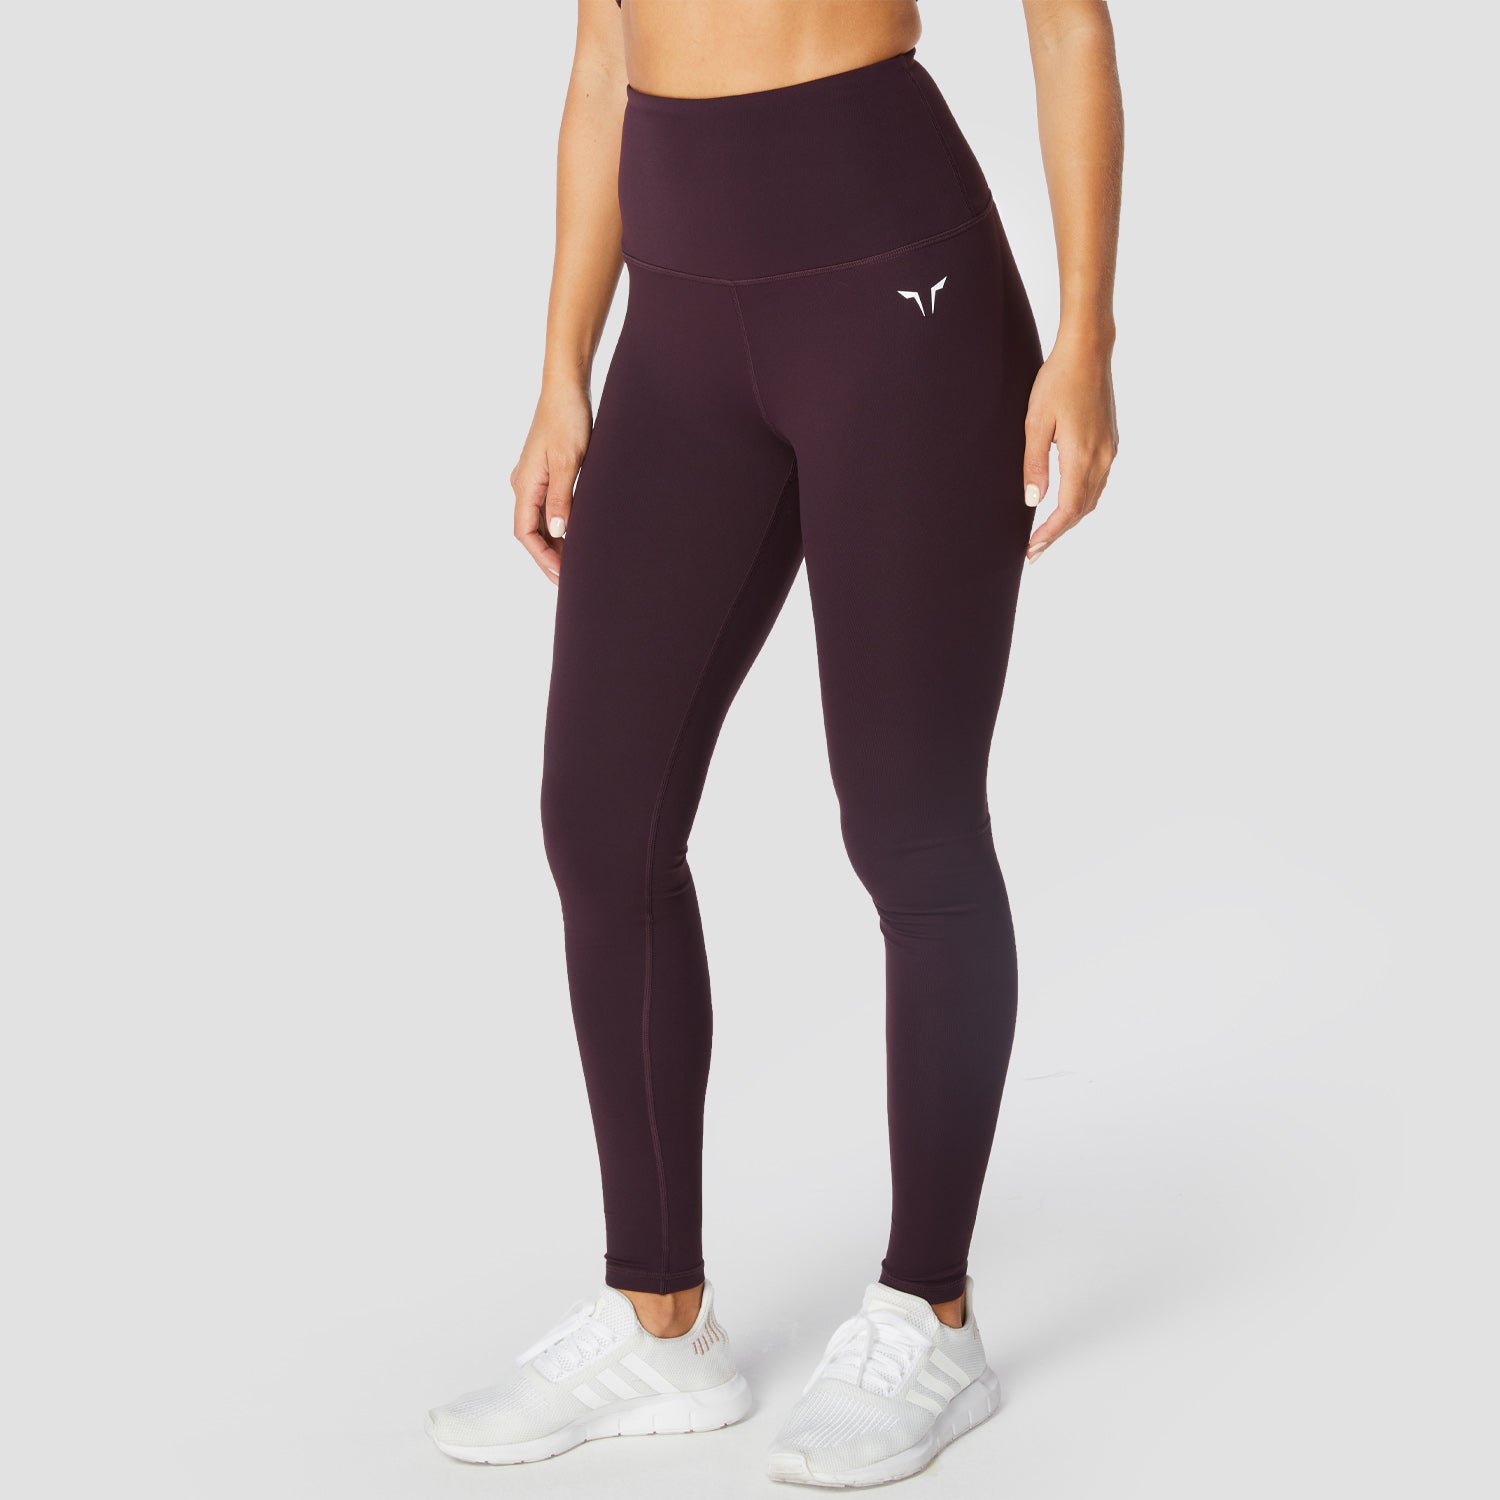 squatwolf-workout-clothes-hera-high-waisted-leggings-purple-gym-leggings-for-women